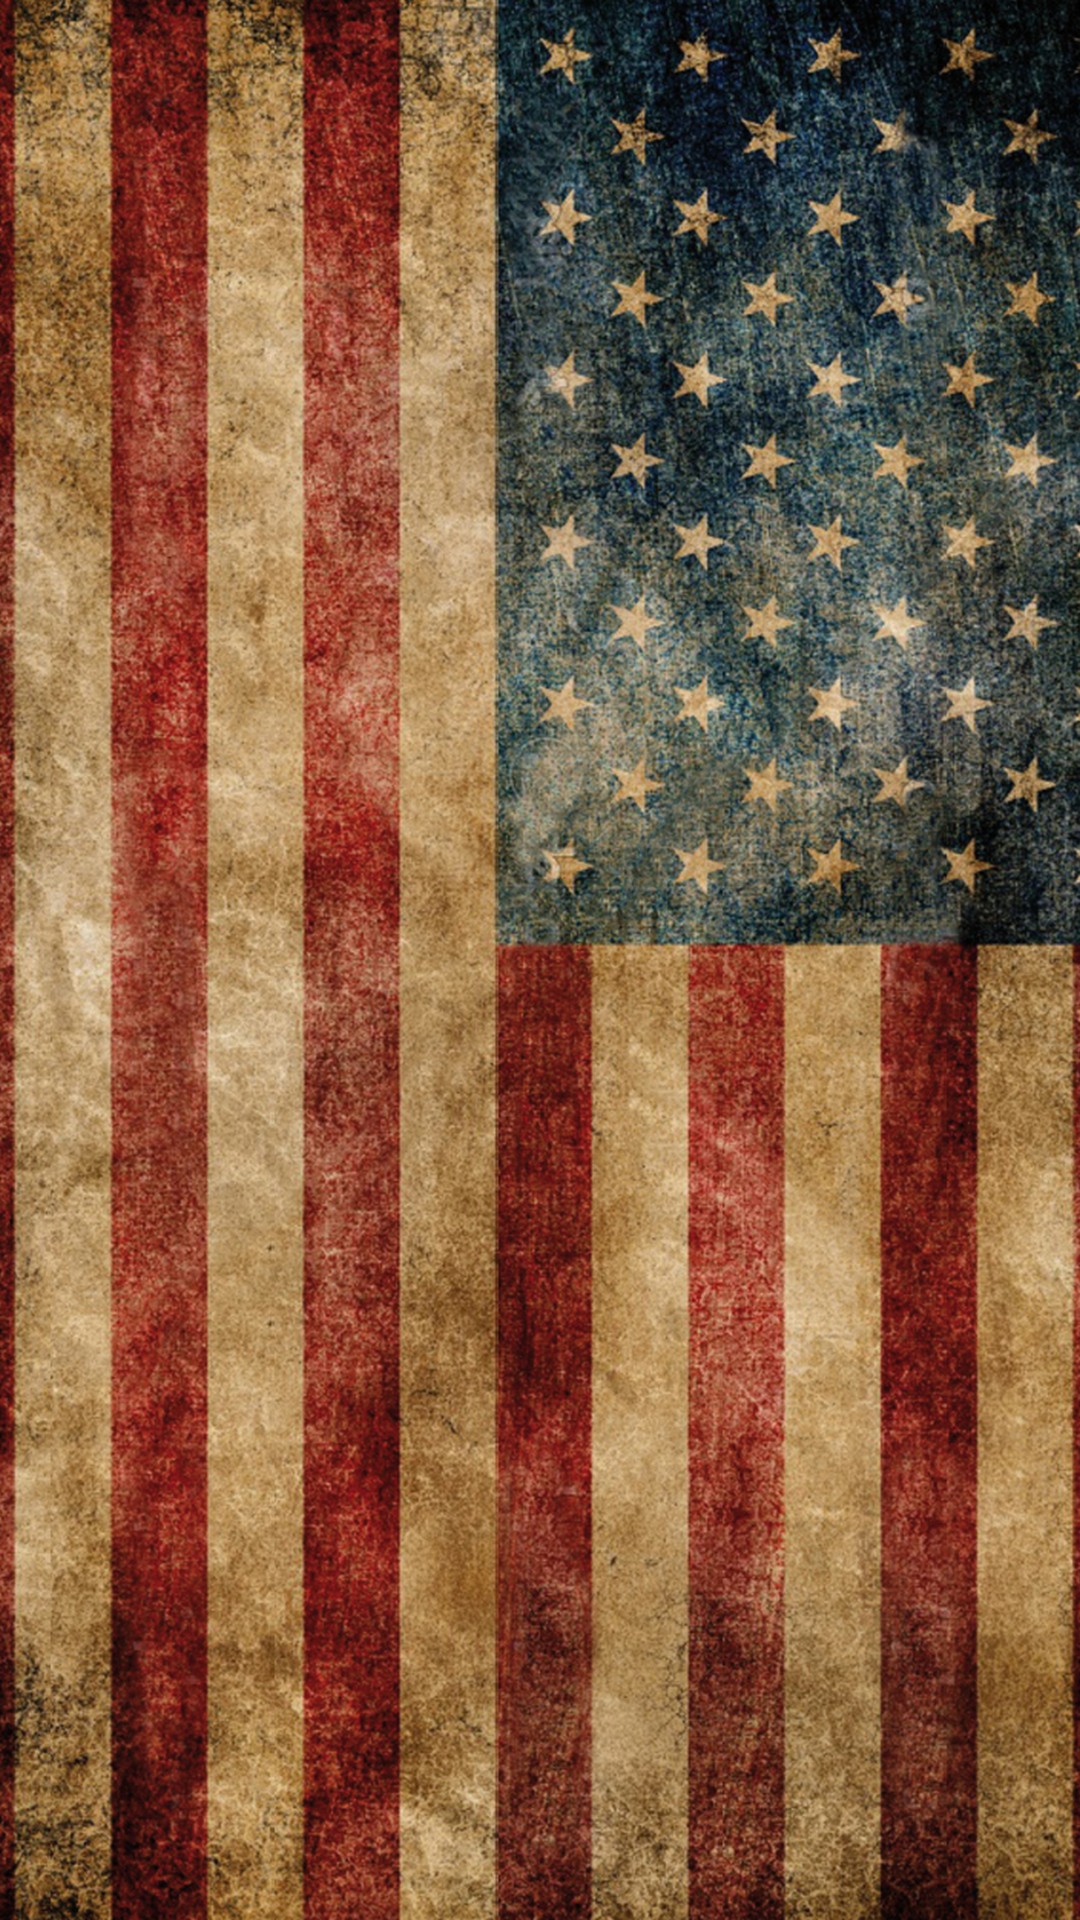 Hd Us Flag Wallpapers